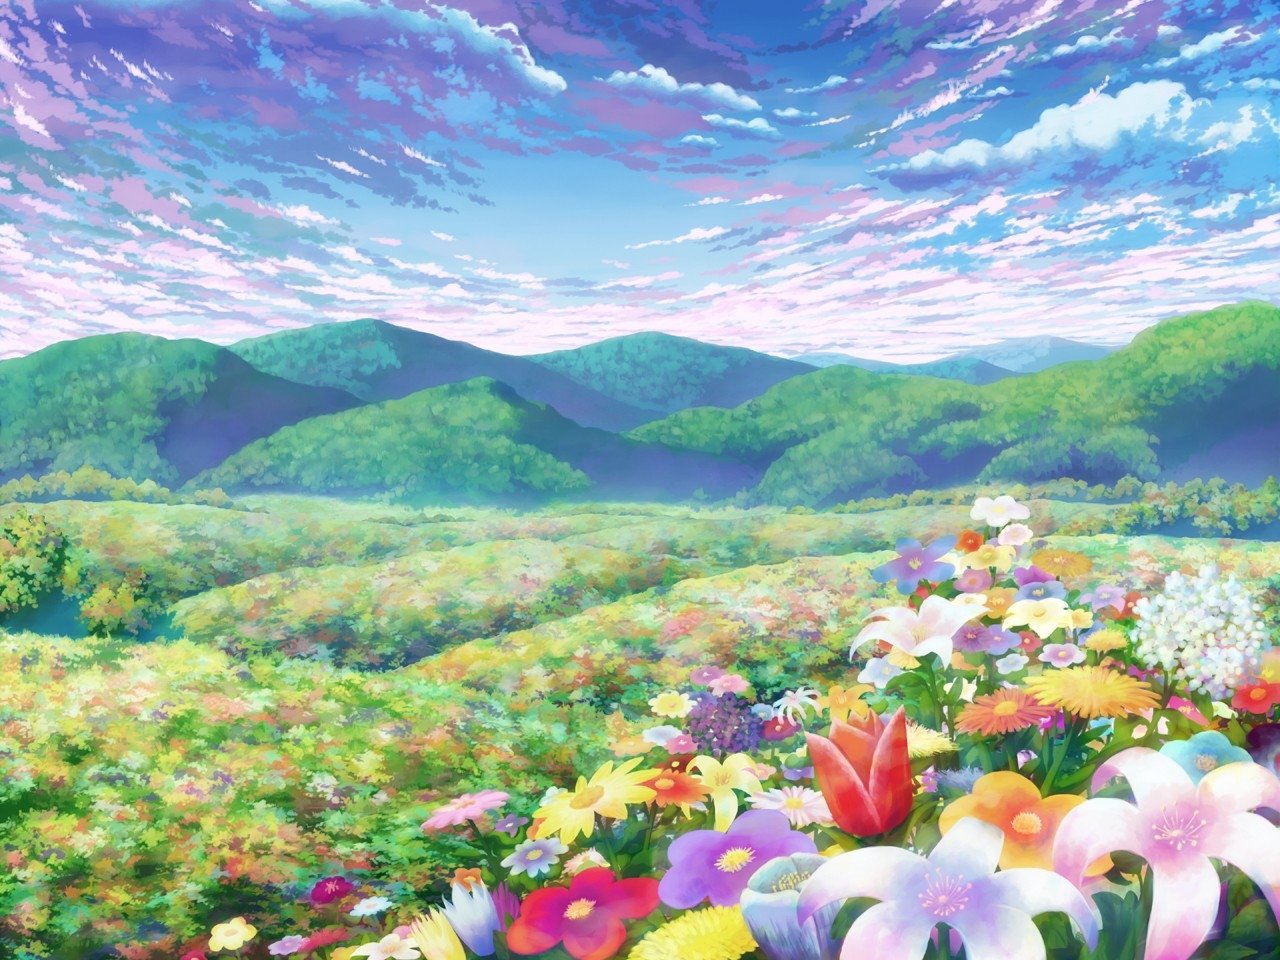 Download Wallpaper, Download 1280x960 green clouds landscapes flowers hills anime blue skies Wallpaper –Free Wallpaper Download